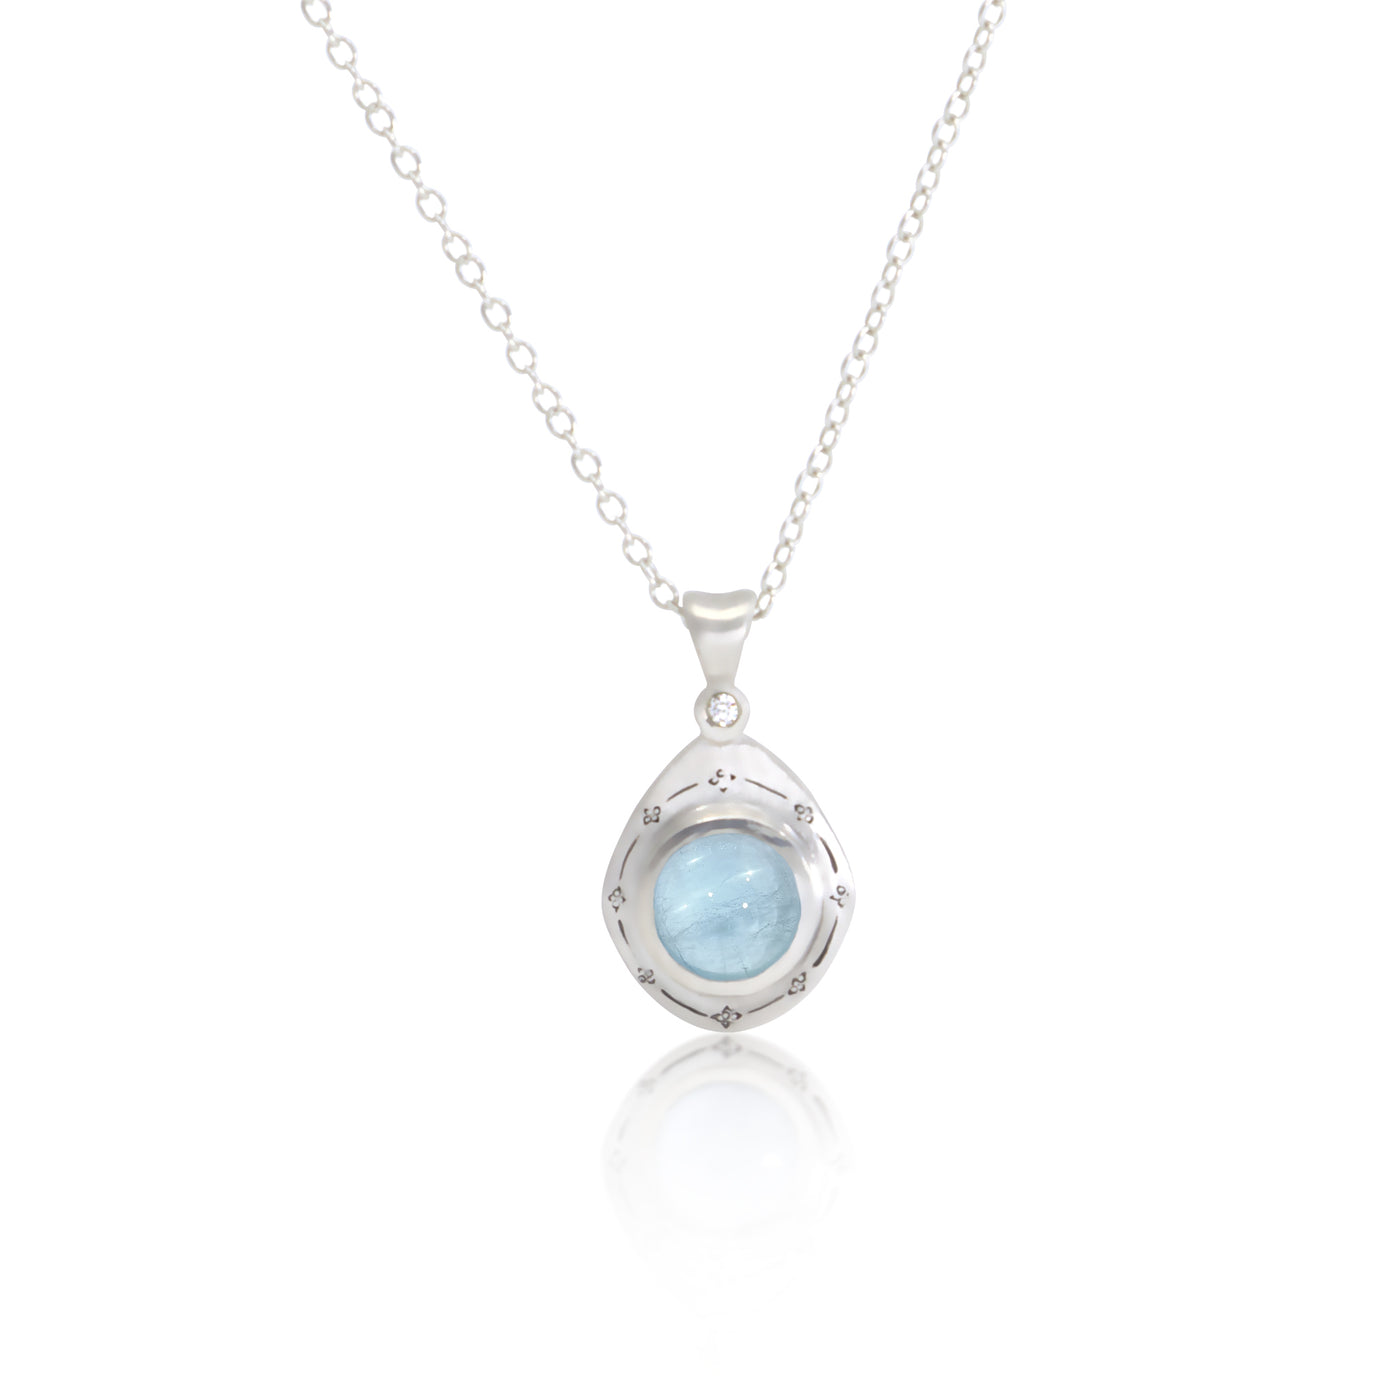 Round Bezel Pendant with Star Engraving